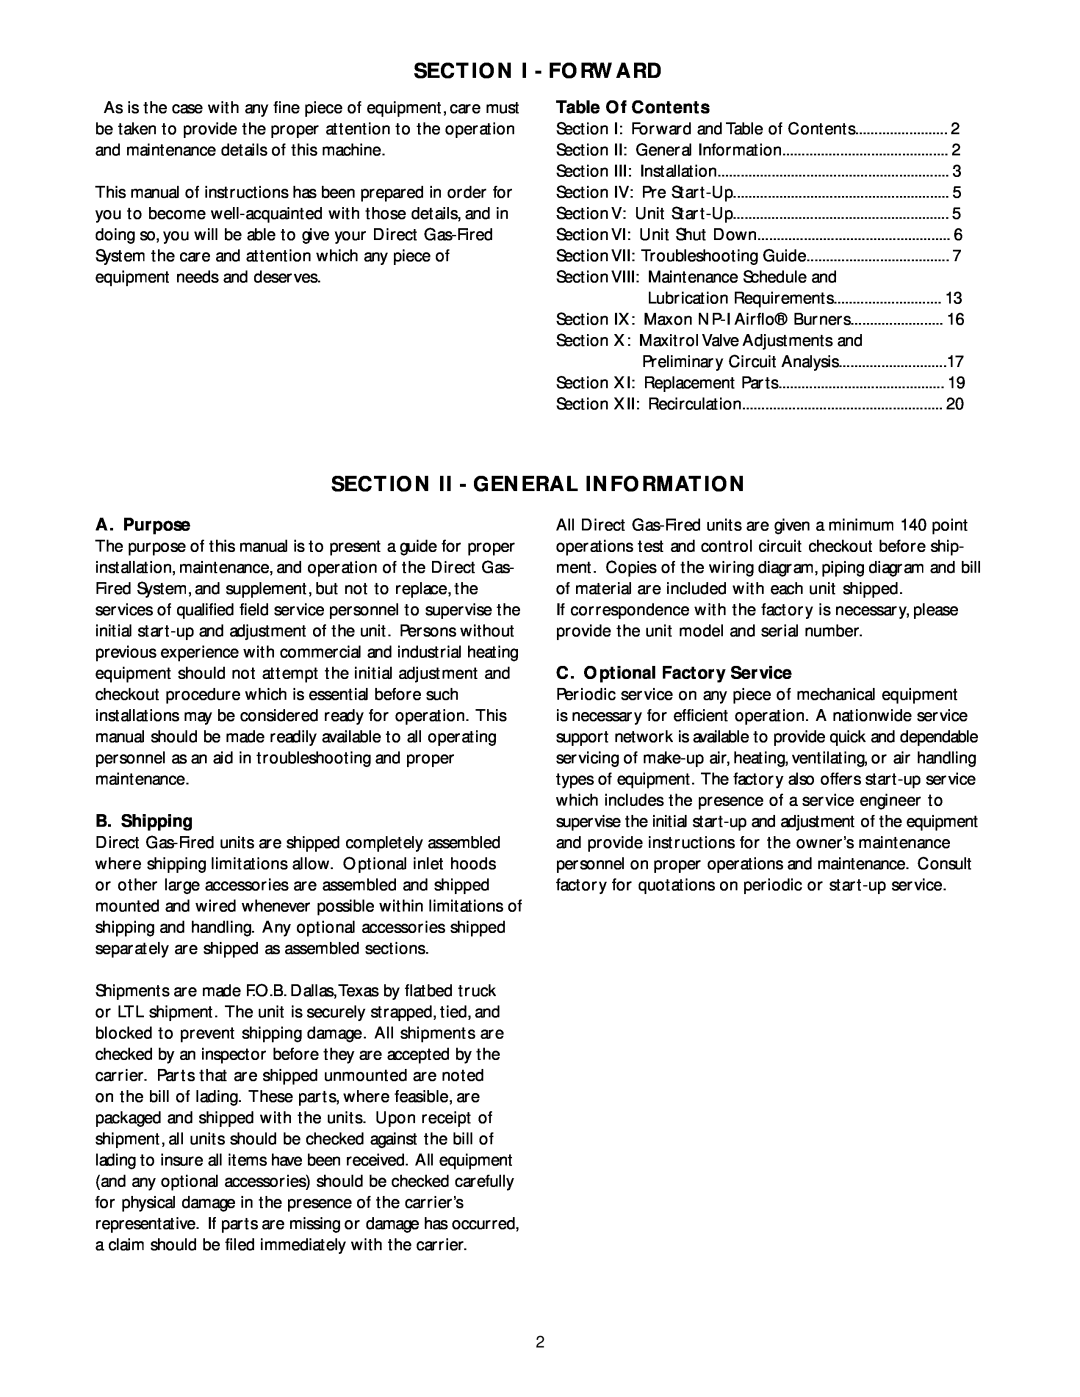 Wing Enterprises IOMWDF-1 Section I - Forward, Section Ii - General Information, Table Of Contents, A. Purpose 